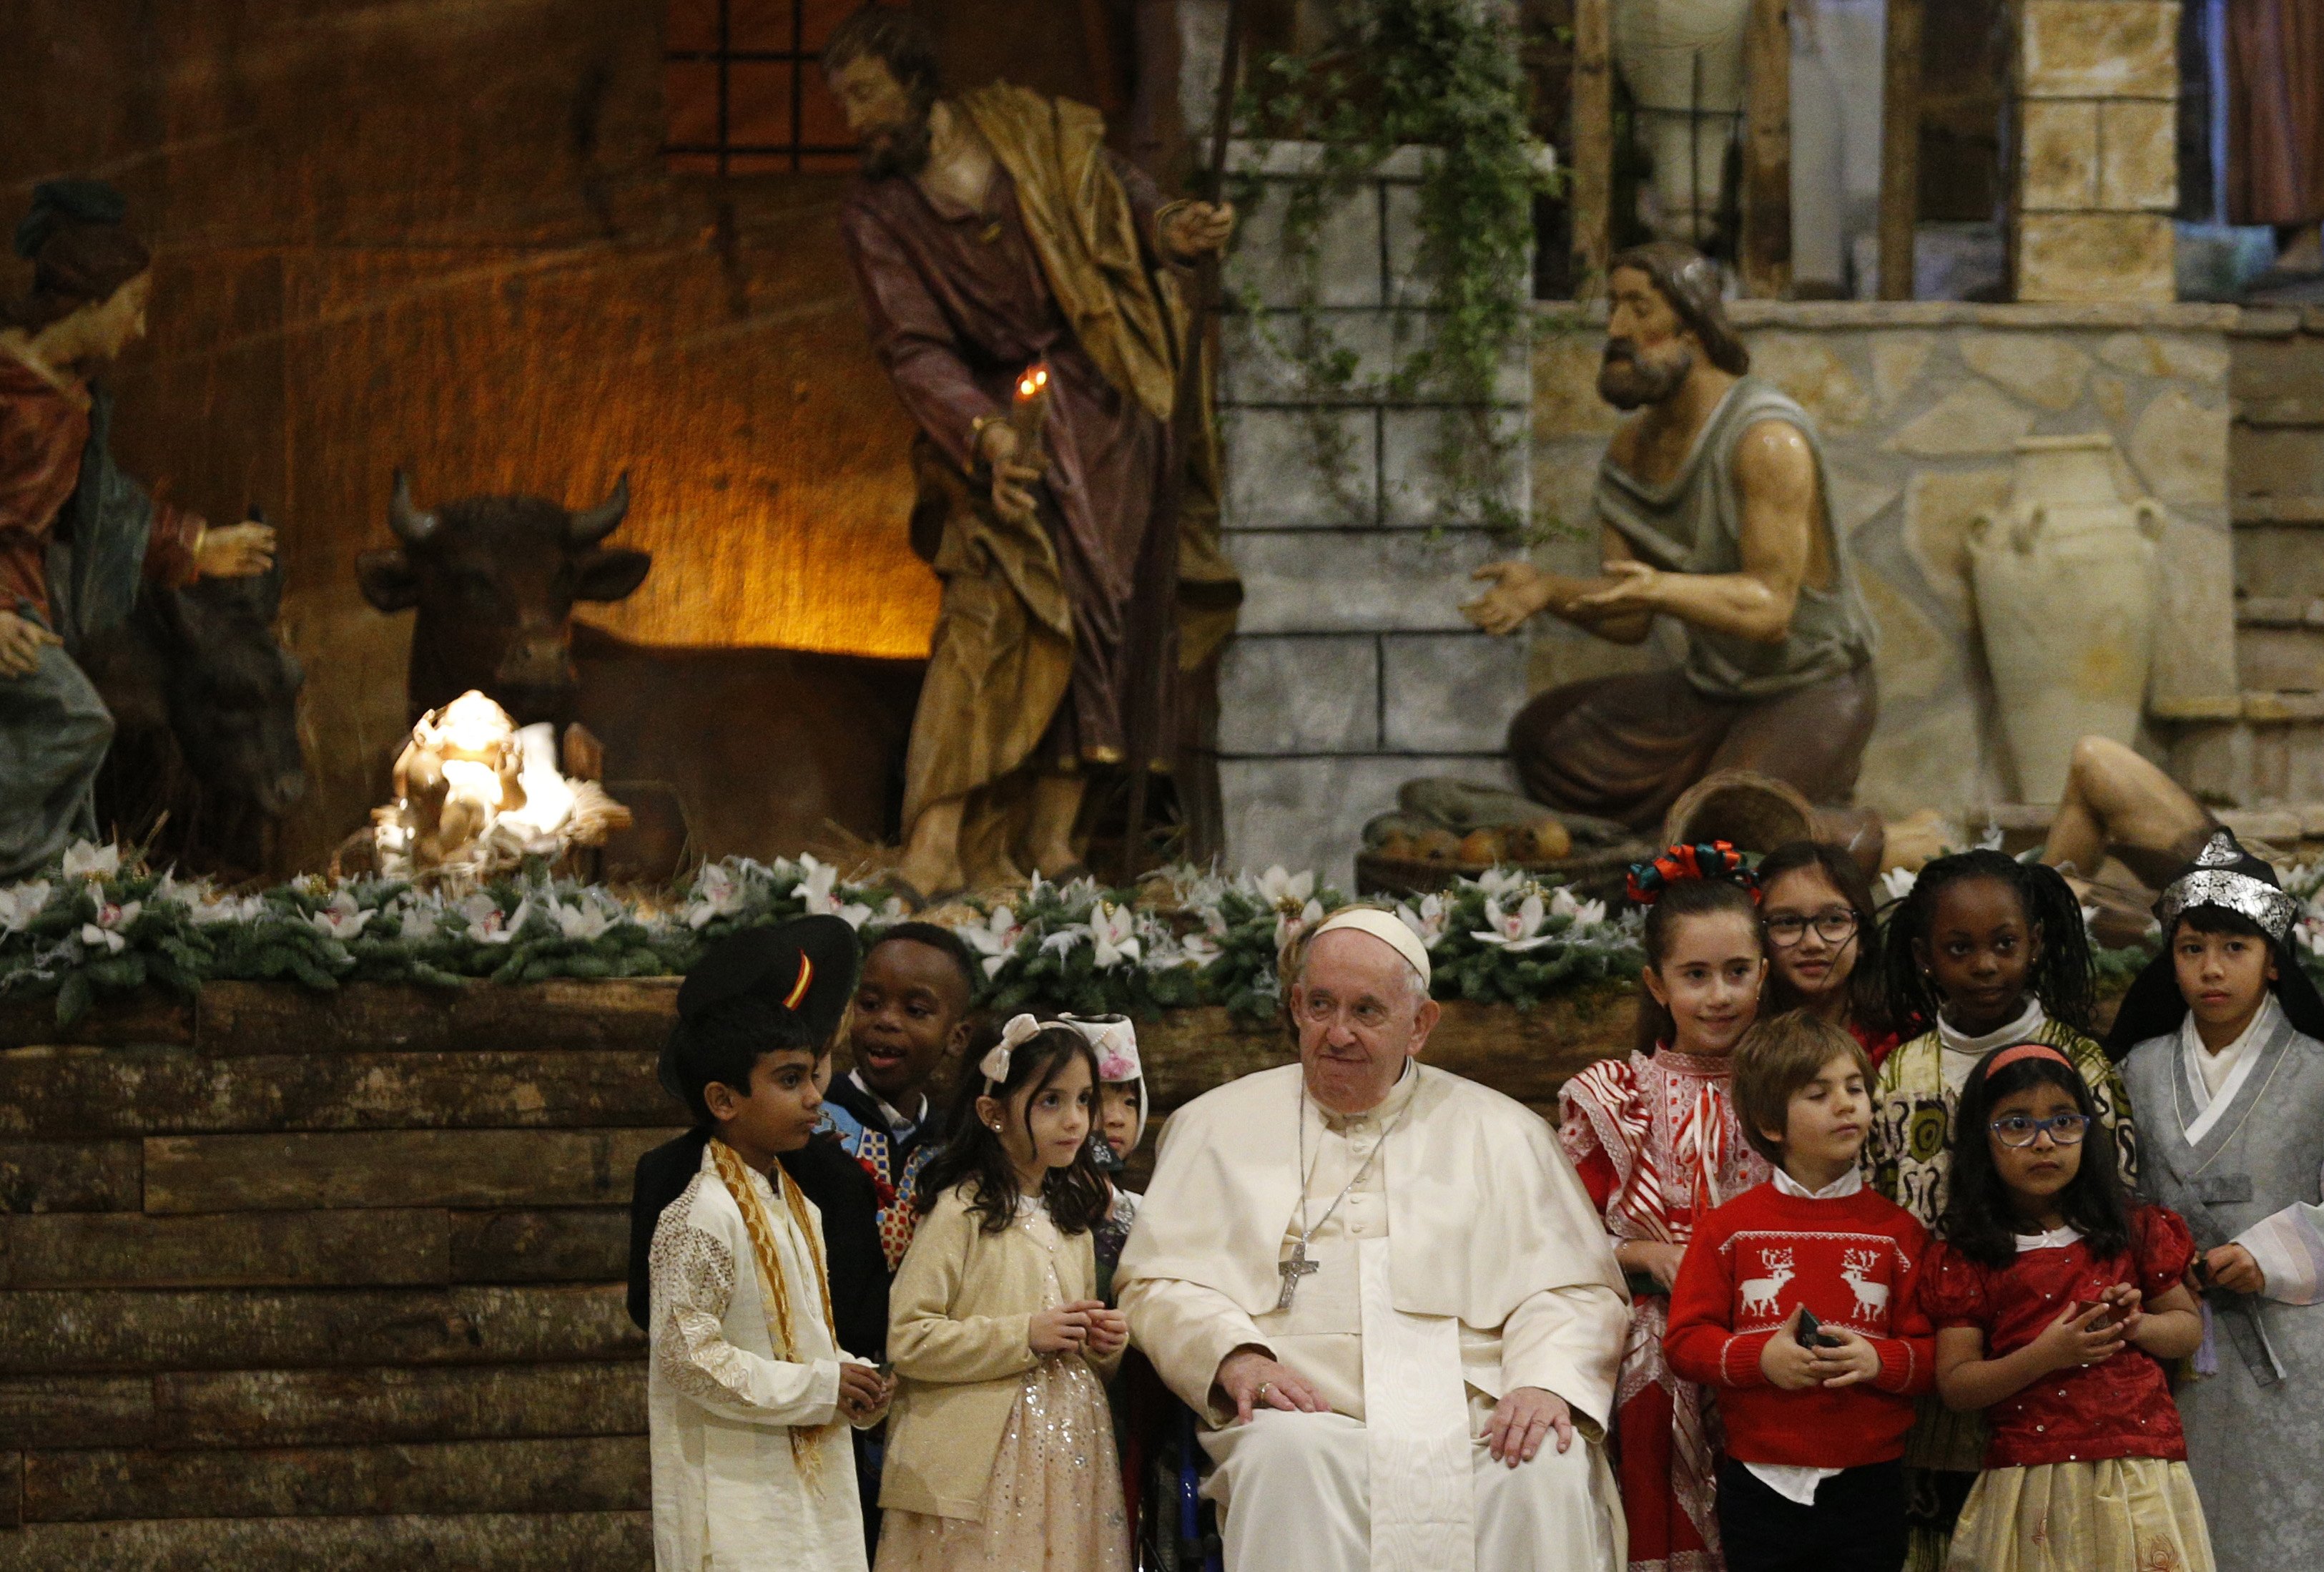 Pope Francis Rediscover the meaning of Christmas in the manger